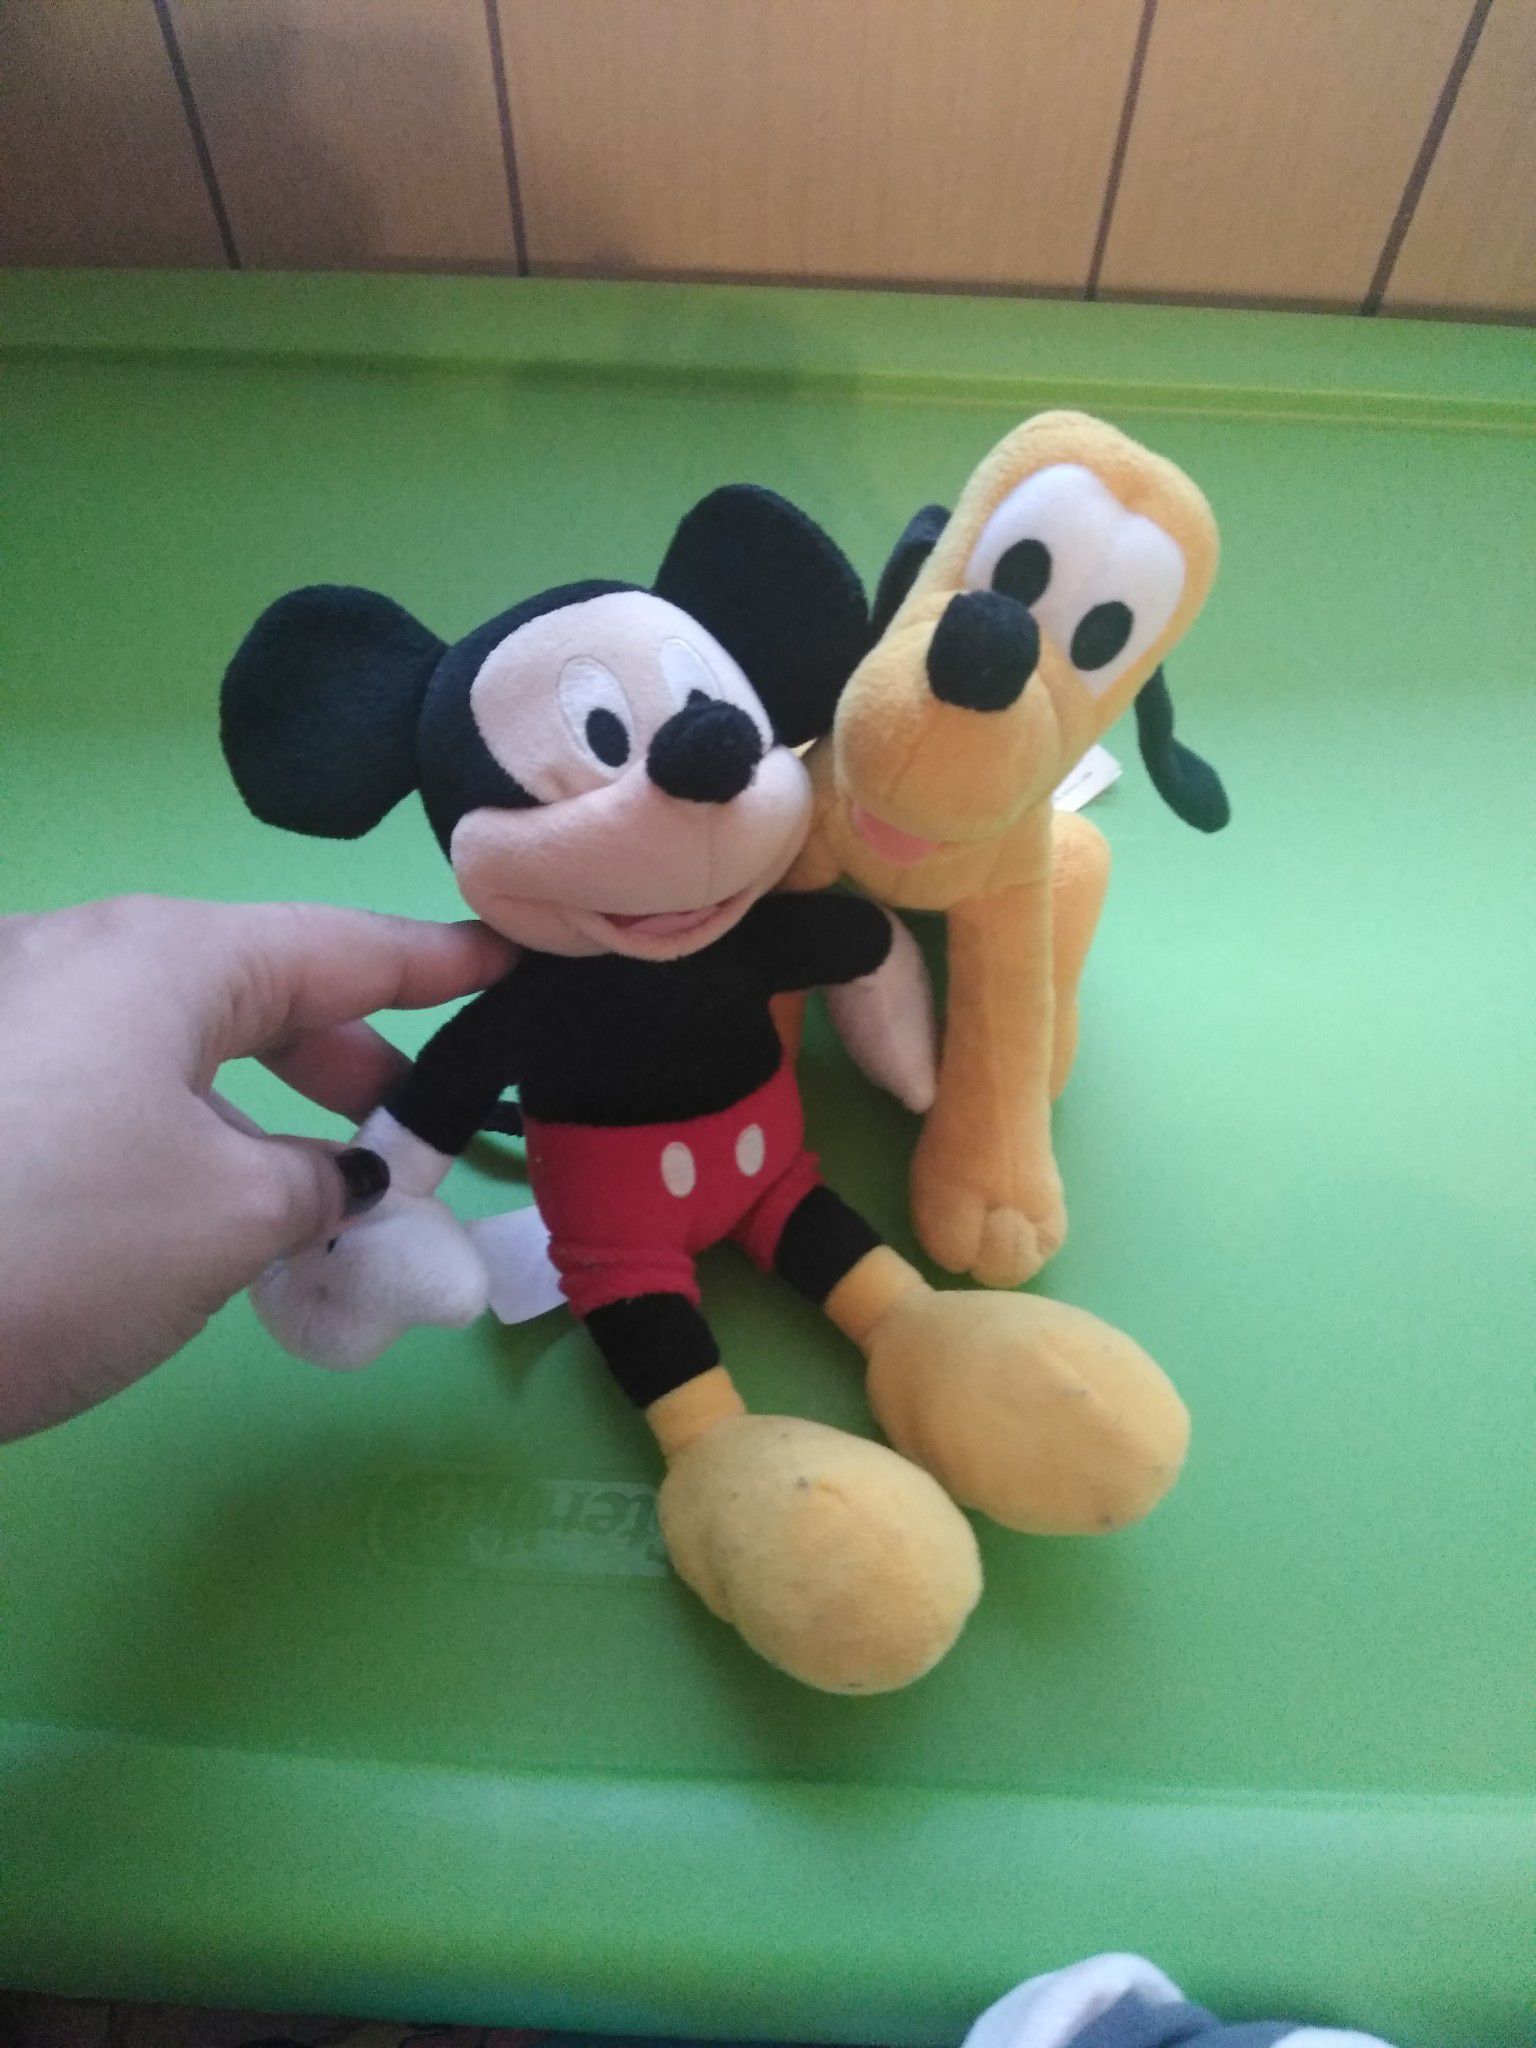 Mickey mouse and Pluto plushies